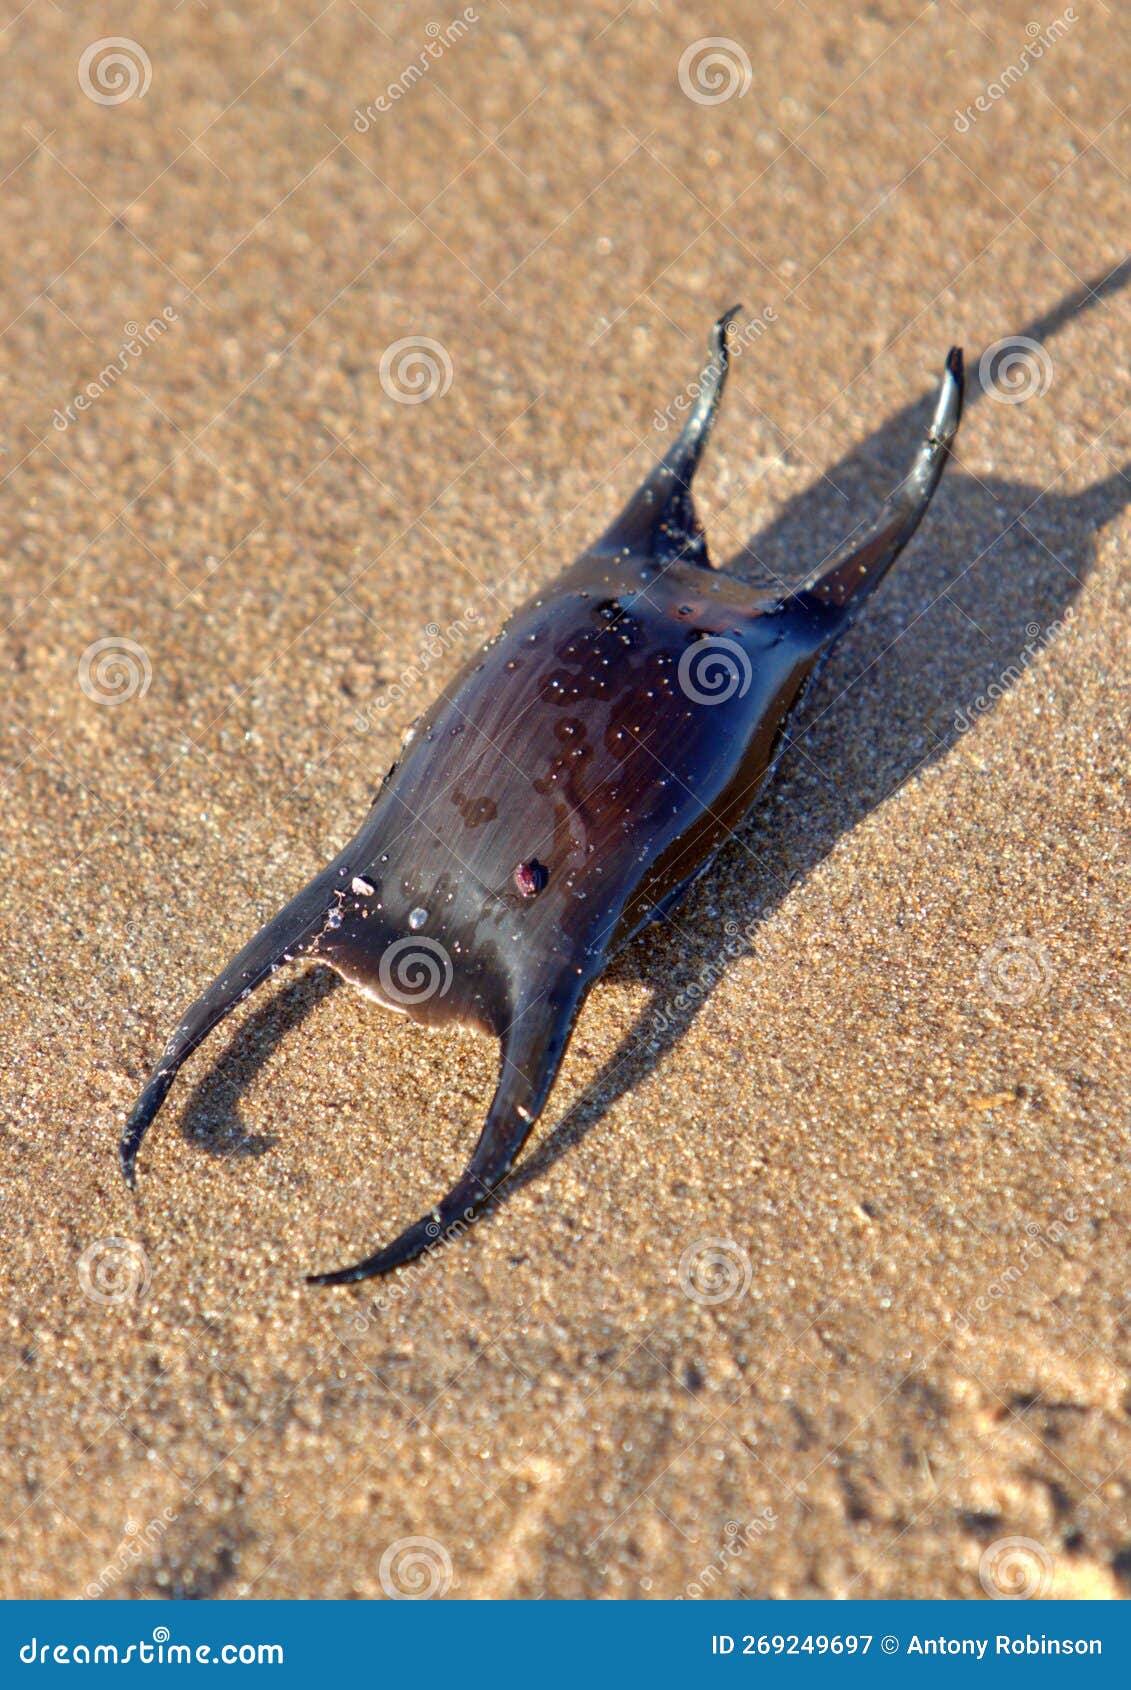 A Big Full Shark Egg Mermaids Purse. Dogfish, Shark, Rays And Skates All  Have Mermaids Purse With Reproduction And Offspring. Sea Egg Attaches To  Seaweed Or Other Vegetation. Stock Photo, Picture and